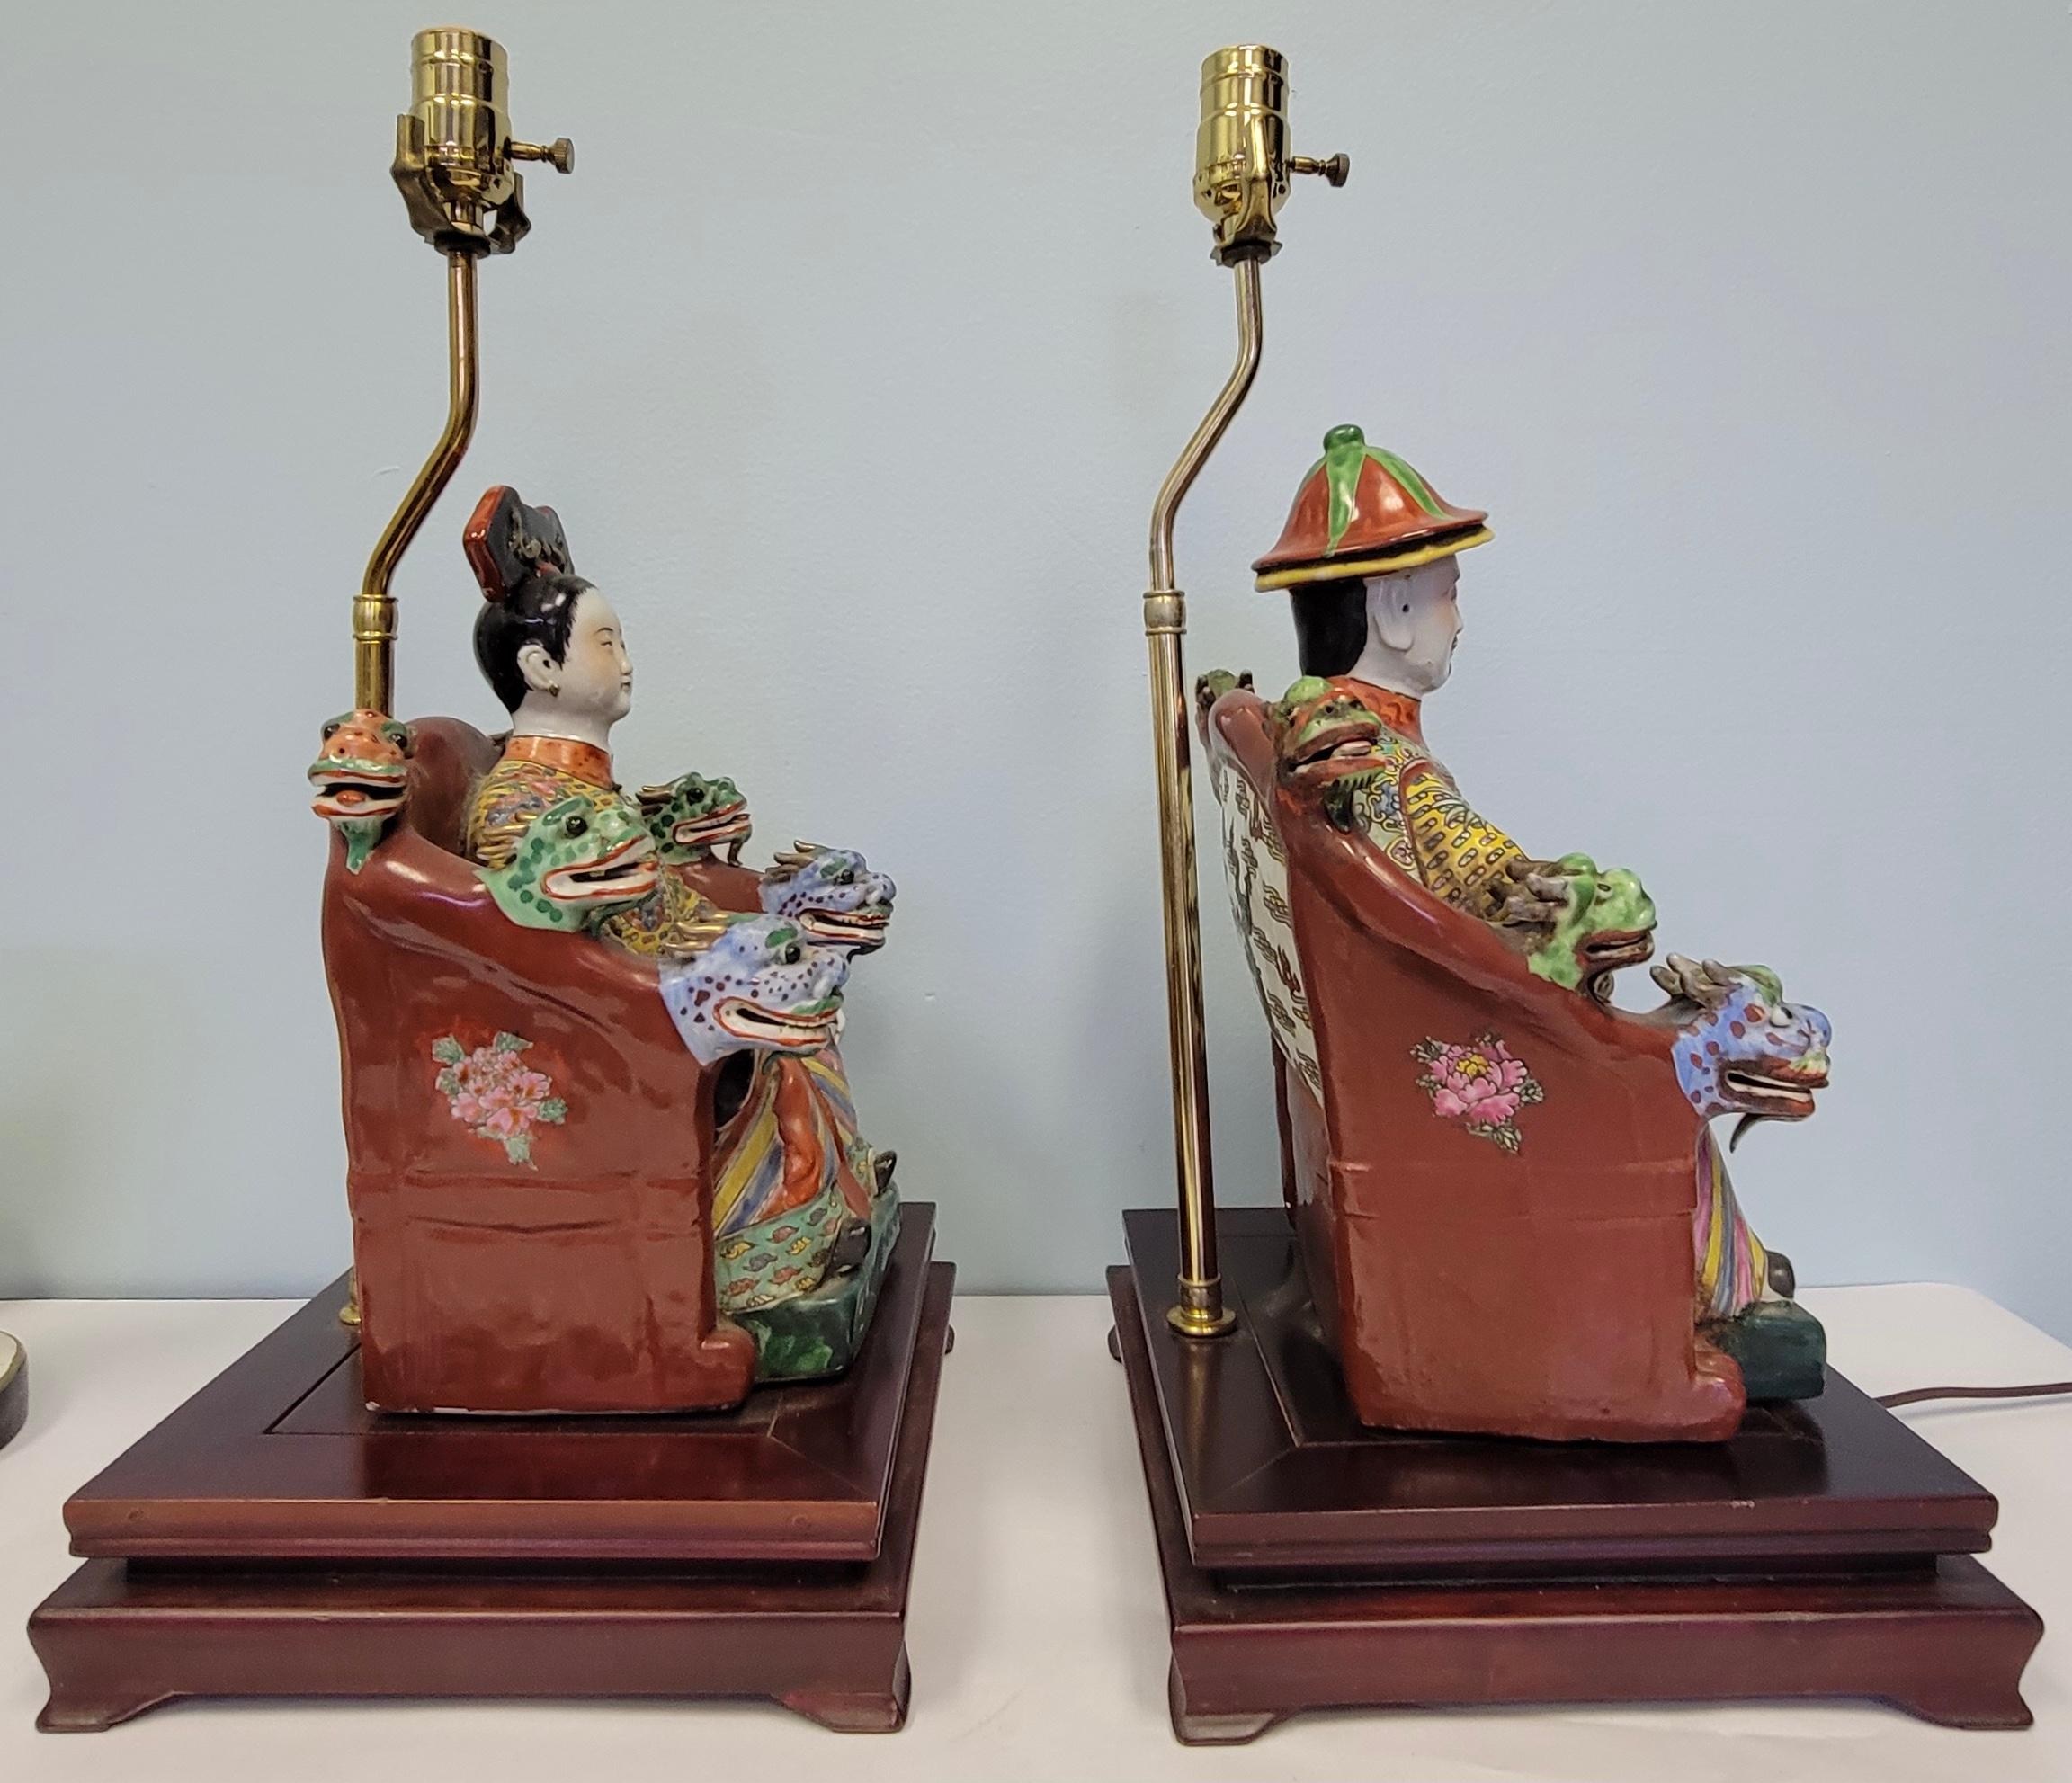 These wonderful chinoiserie lamps are colorful seated ancestors with vintage pagoda form black shades. The male and female figures seem to be flanked by little dragon or foo lion heads. They are in working order and very good condition. The shades,